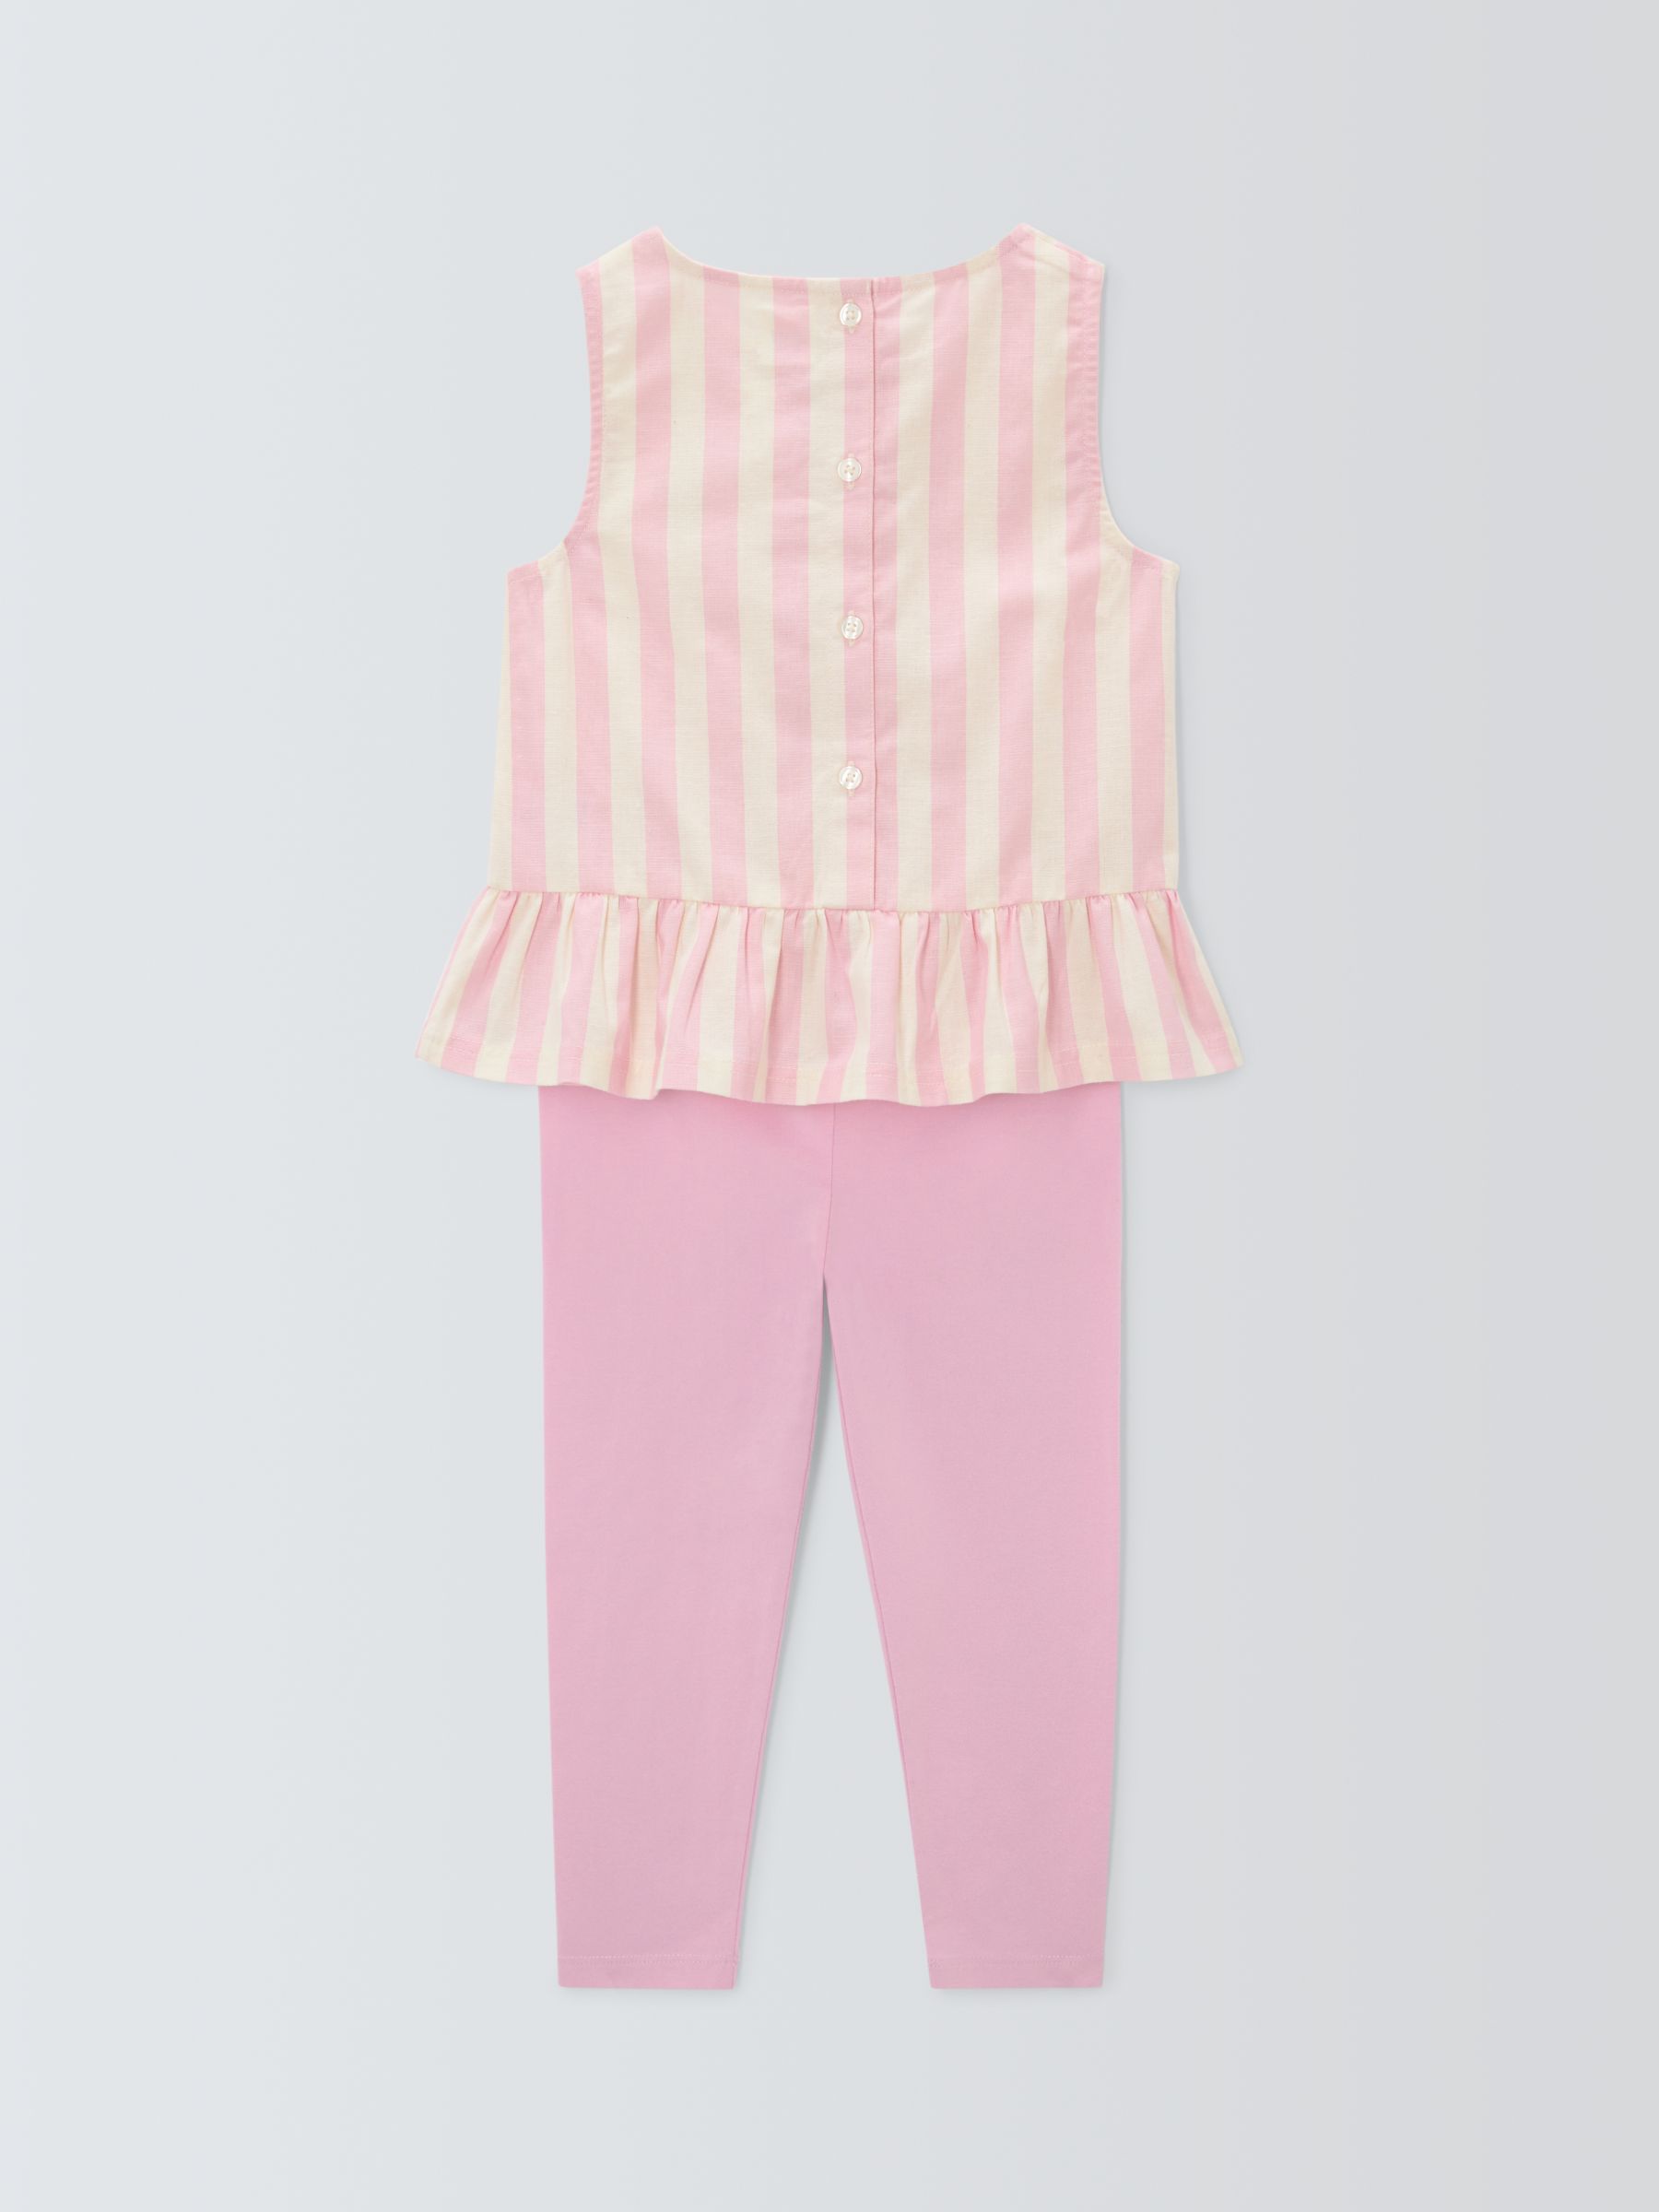 John Lewis ANYDAY Baby Peplum Top and Leggings Outfit, Pink, 2-3 years